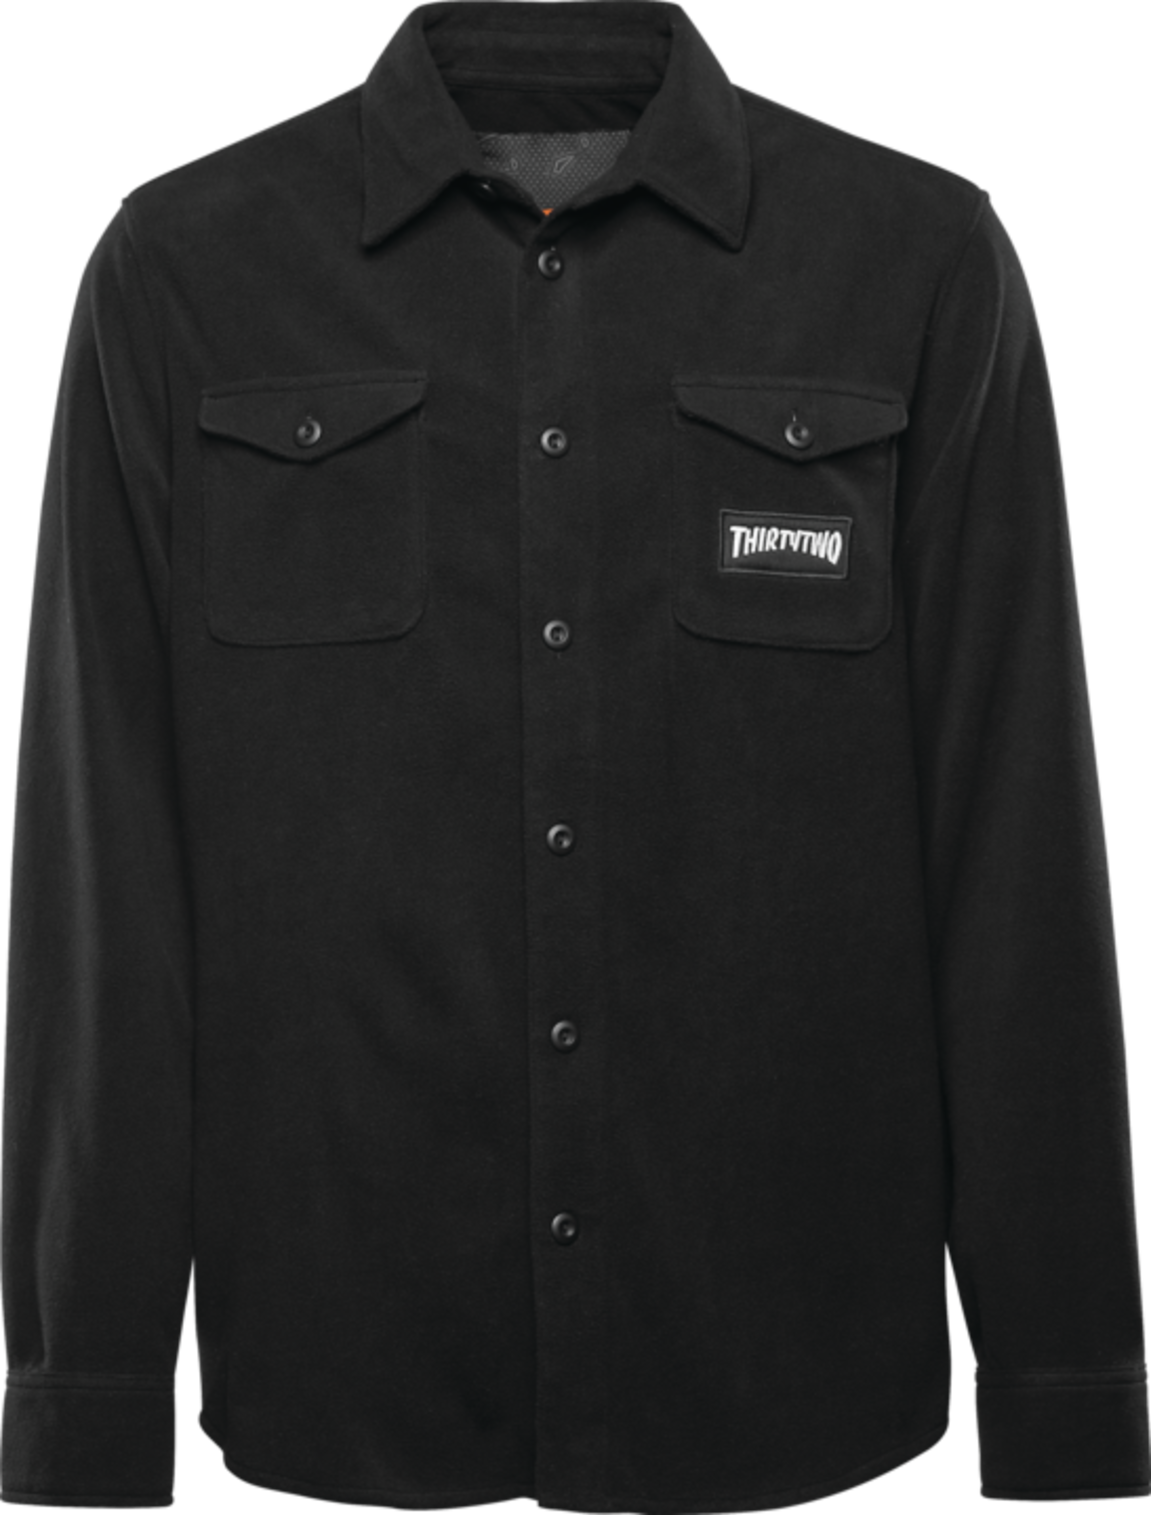 Thirtytwo Men's Rest Stop Woven Black Clothing